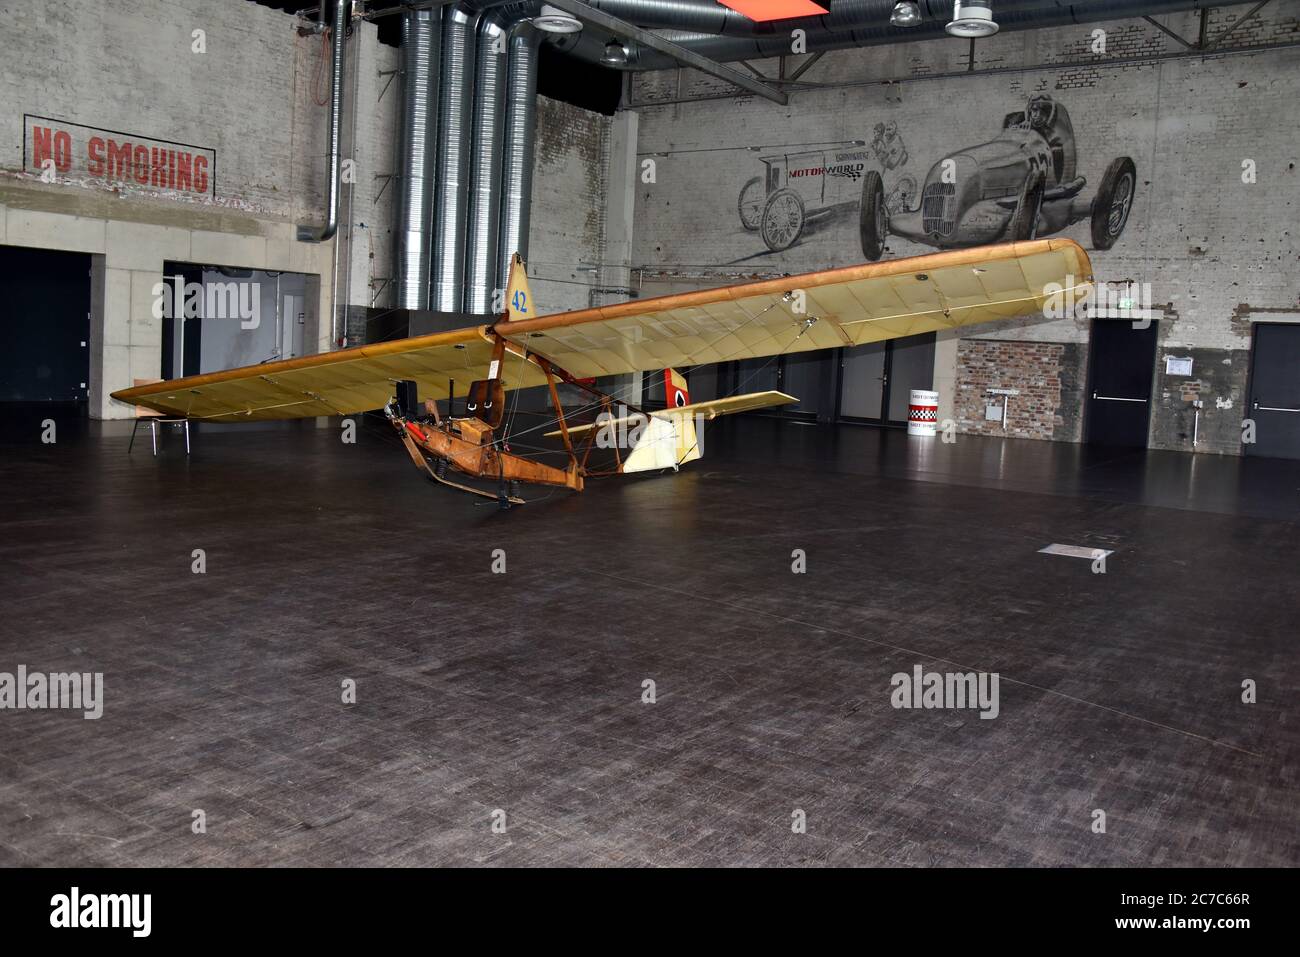 Cologne, Germany. 15th July, 2020. A school glider SG 38, glider from the year 1942 is standing at a press event in the Motorworld Credit: Horst Galuschka/dpa/Alamy Live News Stock Photo